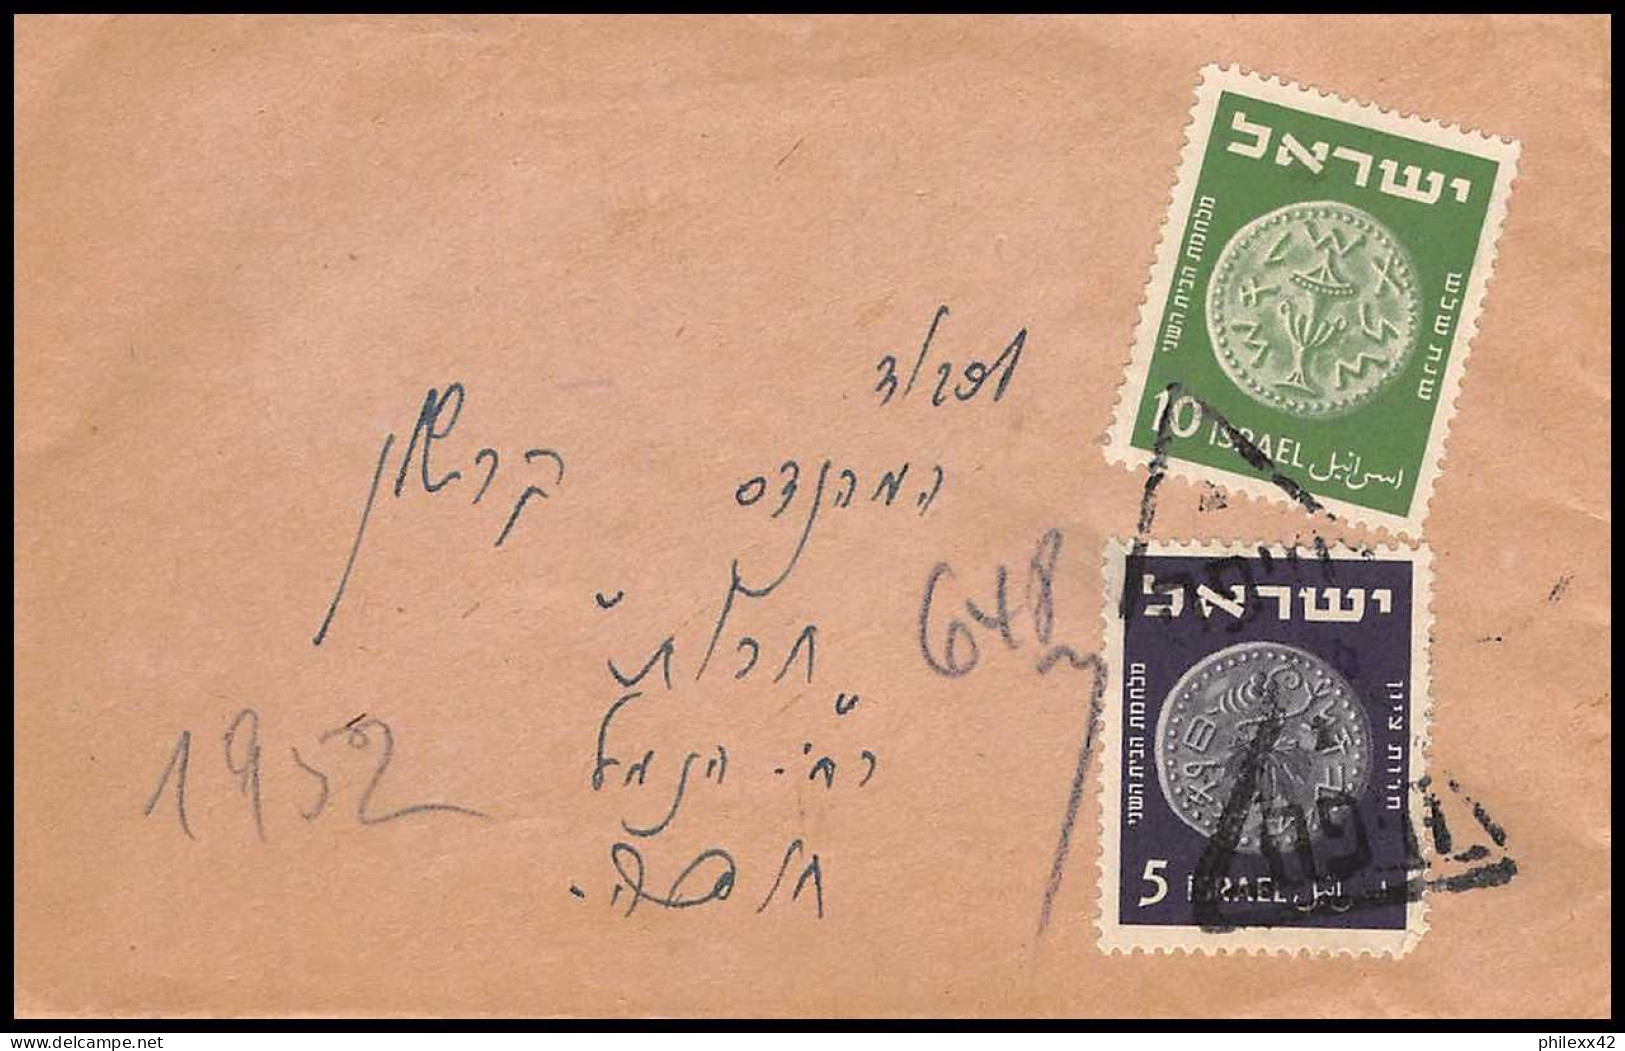 11554 collection / lot de 21 coin 1950's lettres cover israels 